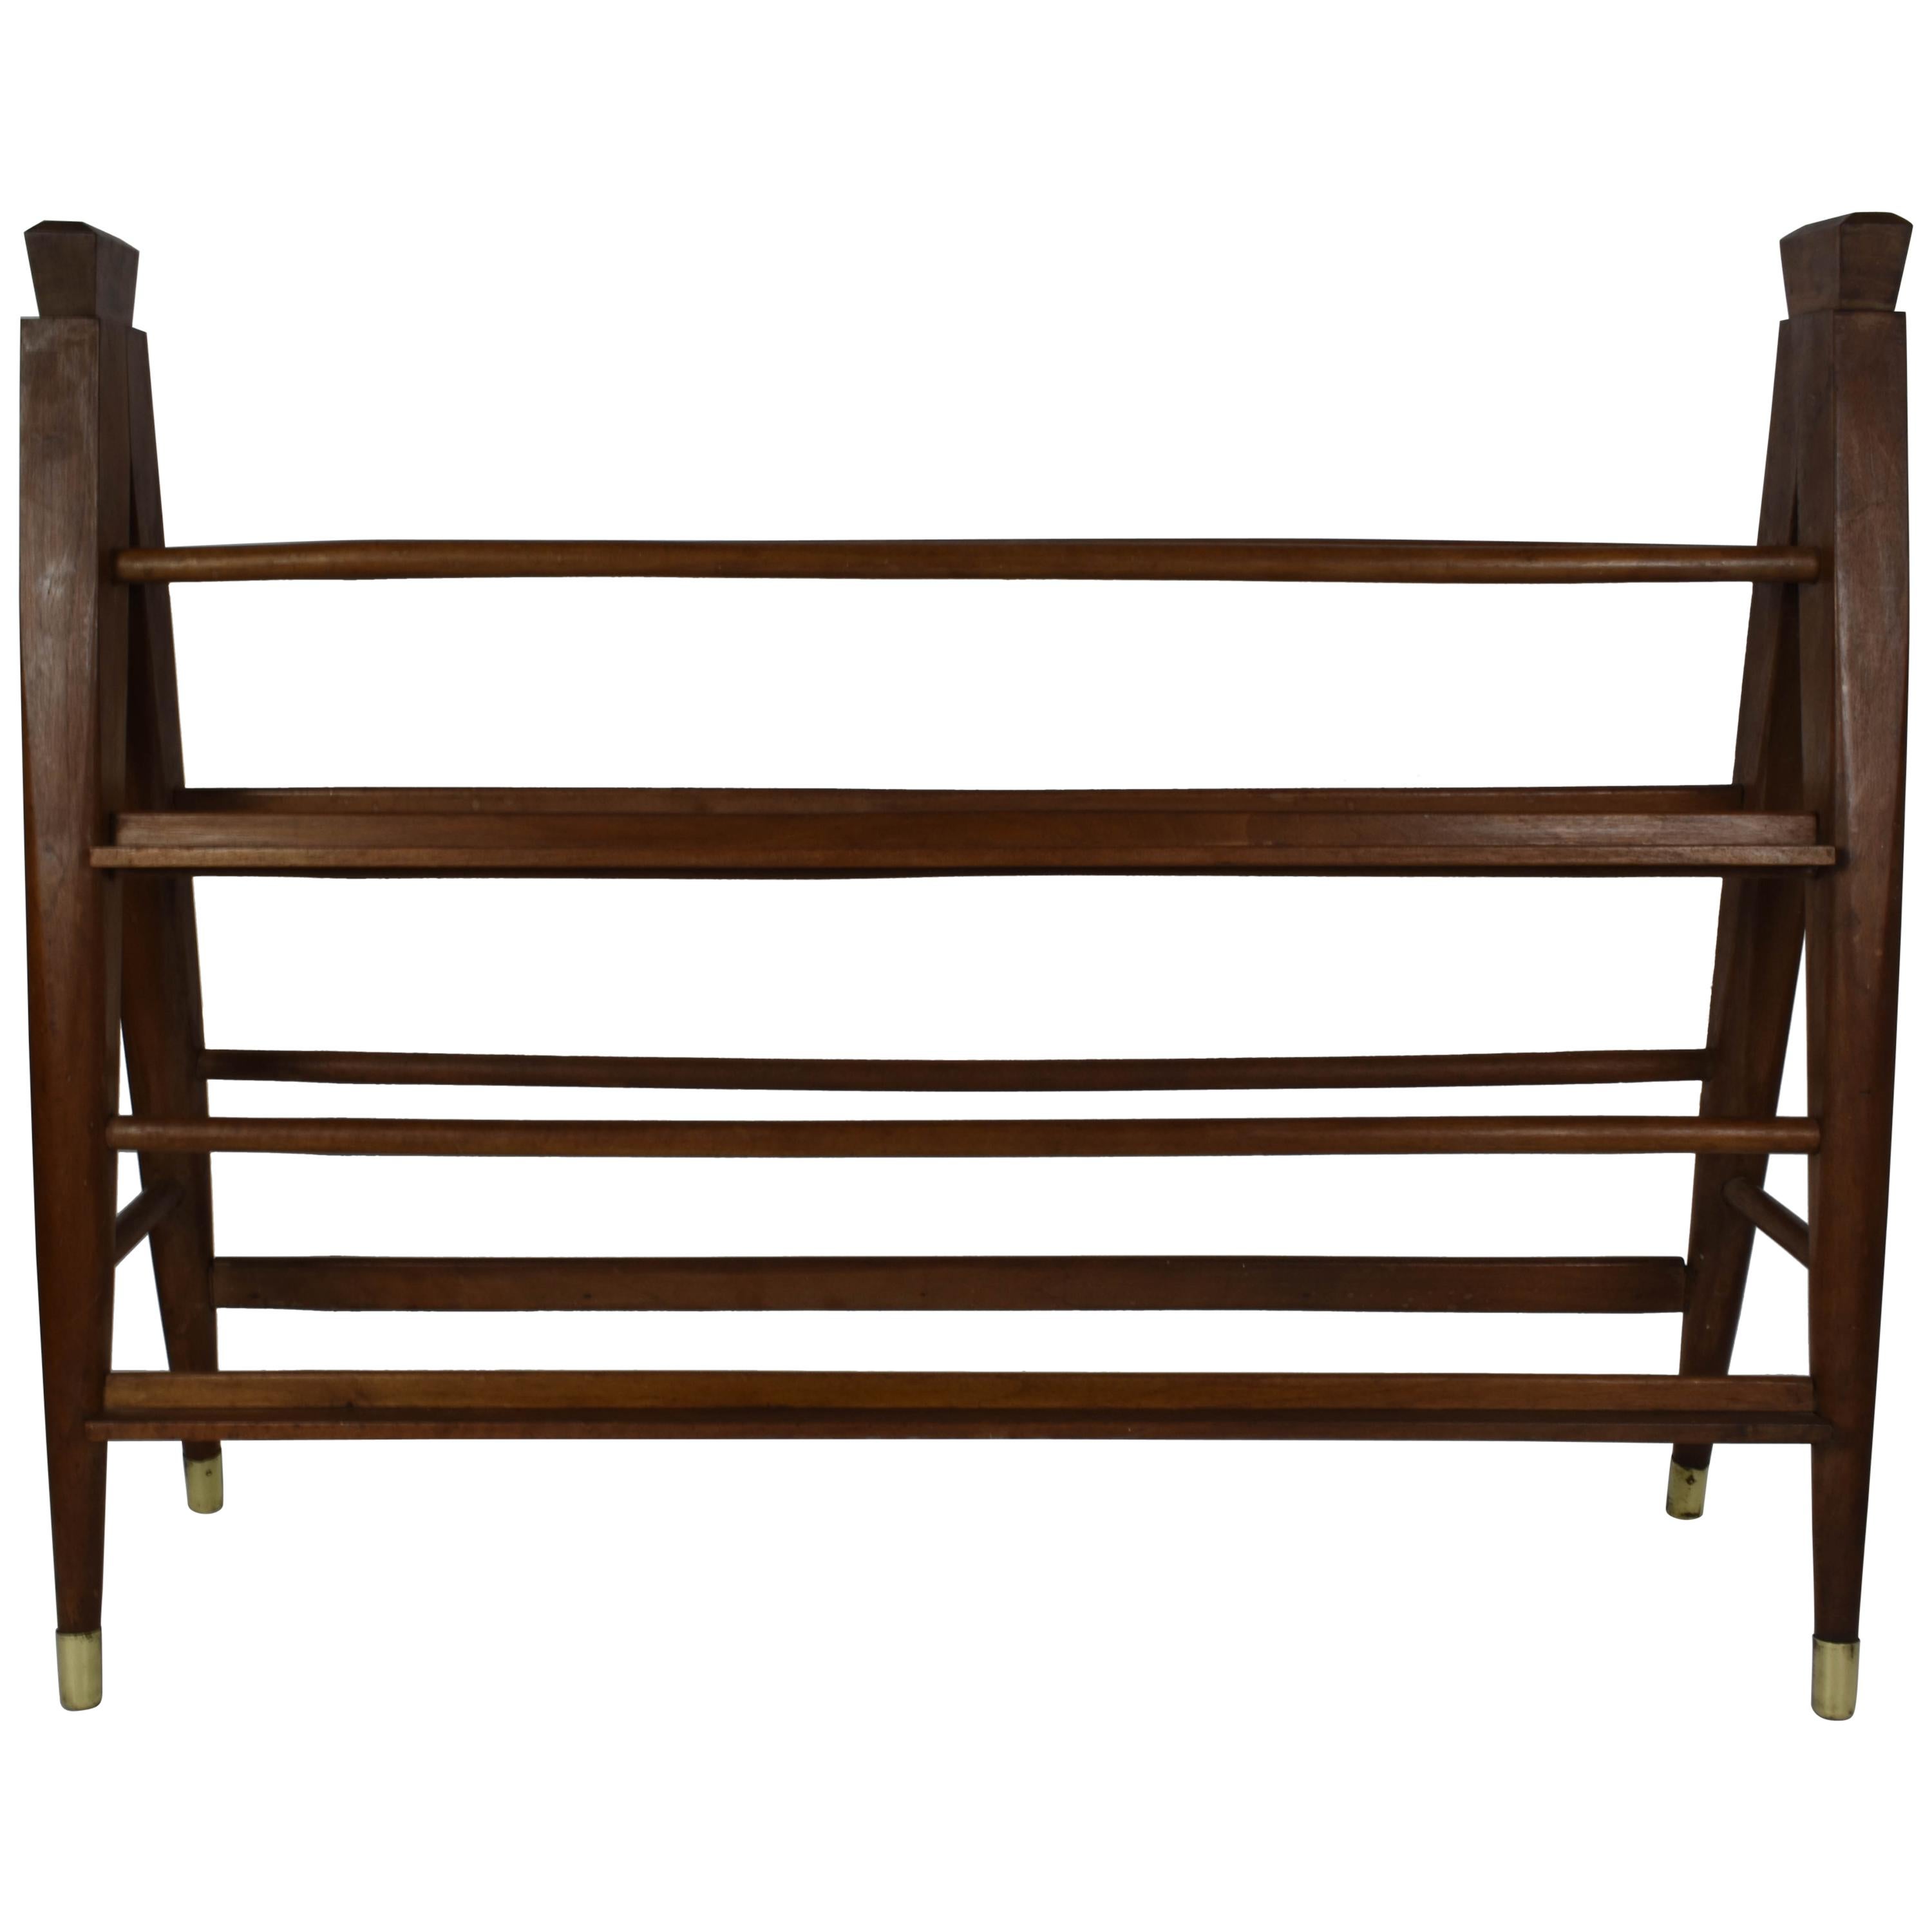 FINAL SALE Vintage Two Sided Dutch Decorative Wooden Book Stand or Display Rack For Sale